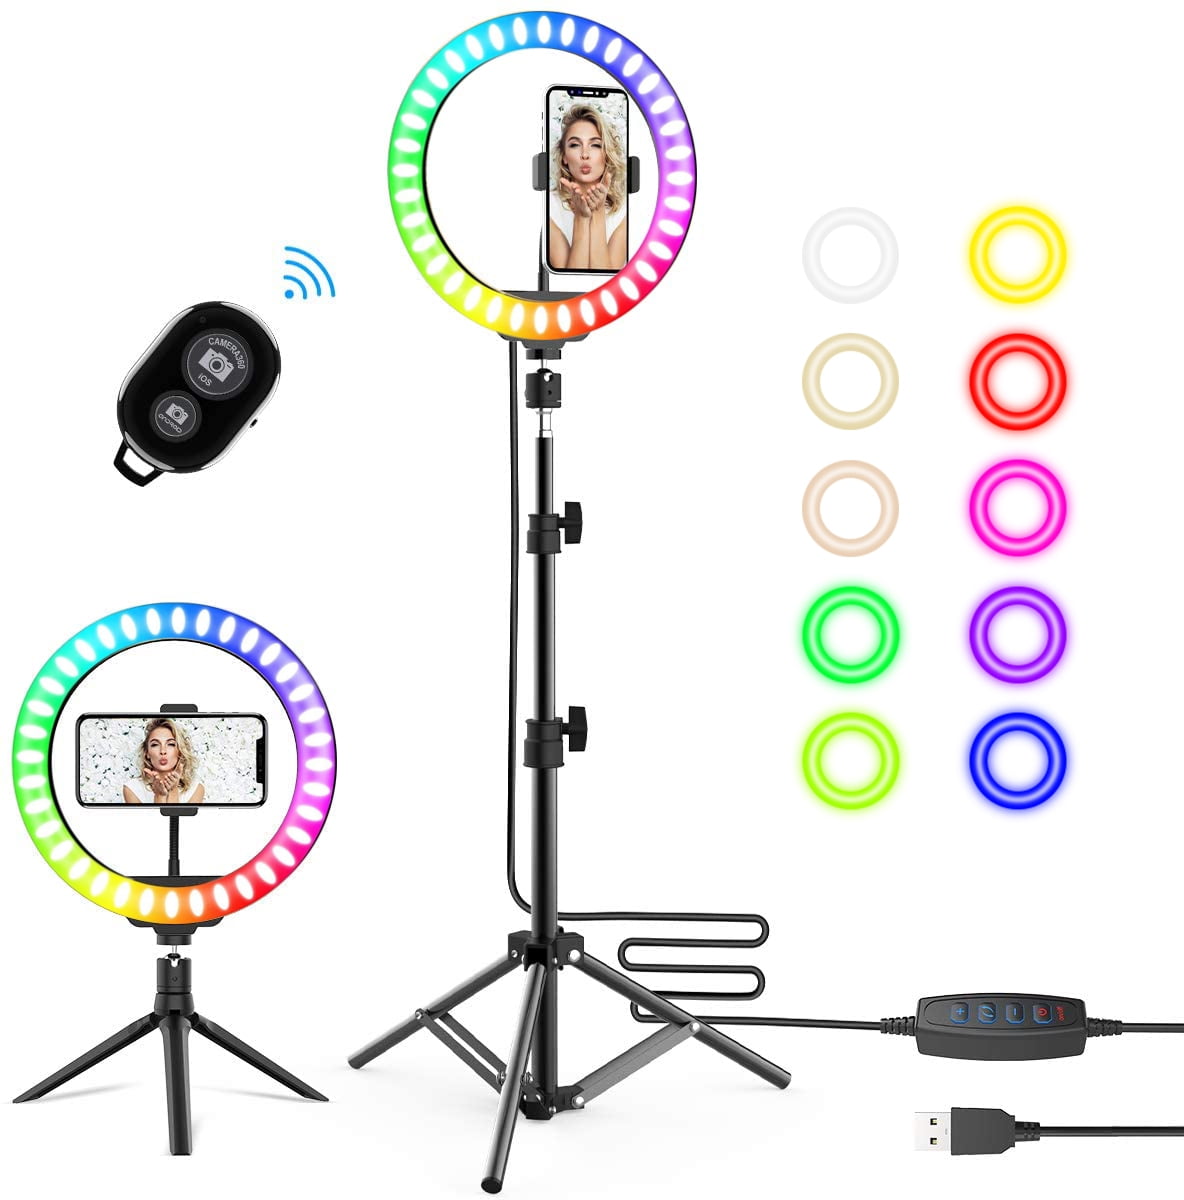 Selfie Ring Light RGB Ring Light with Stand/Phone Holder/Bluetooth Remote Control,Dimmable Video Conference Lighting Kit for TIK Tok,YouTube Lights,Makeup,Live Stream,Photography 